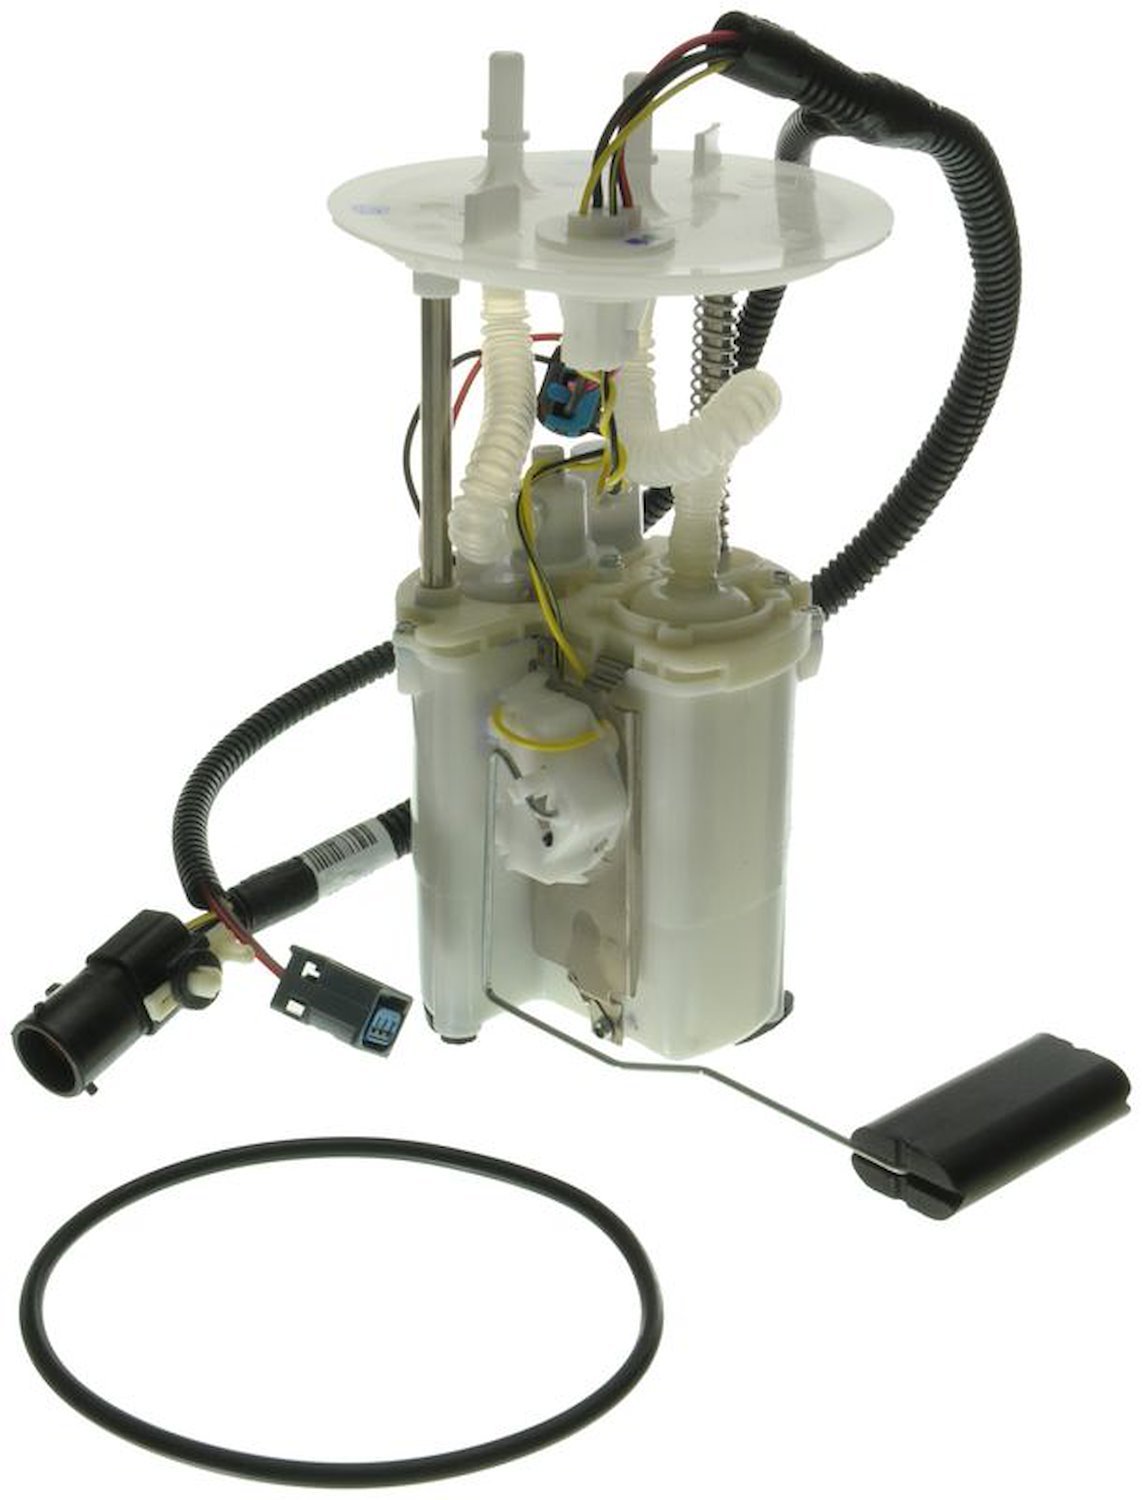 OE Ford Replacement Fuel Pump Module Assembly for 2001 Ford Taurus/Mercury Sable